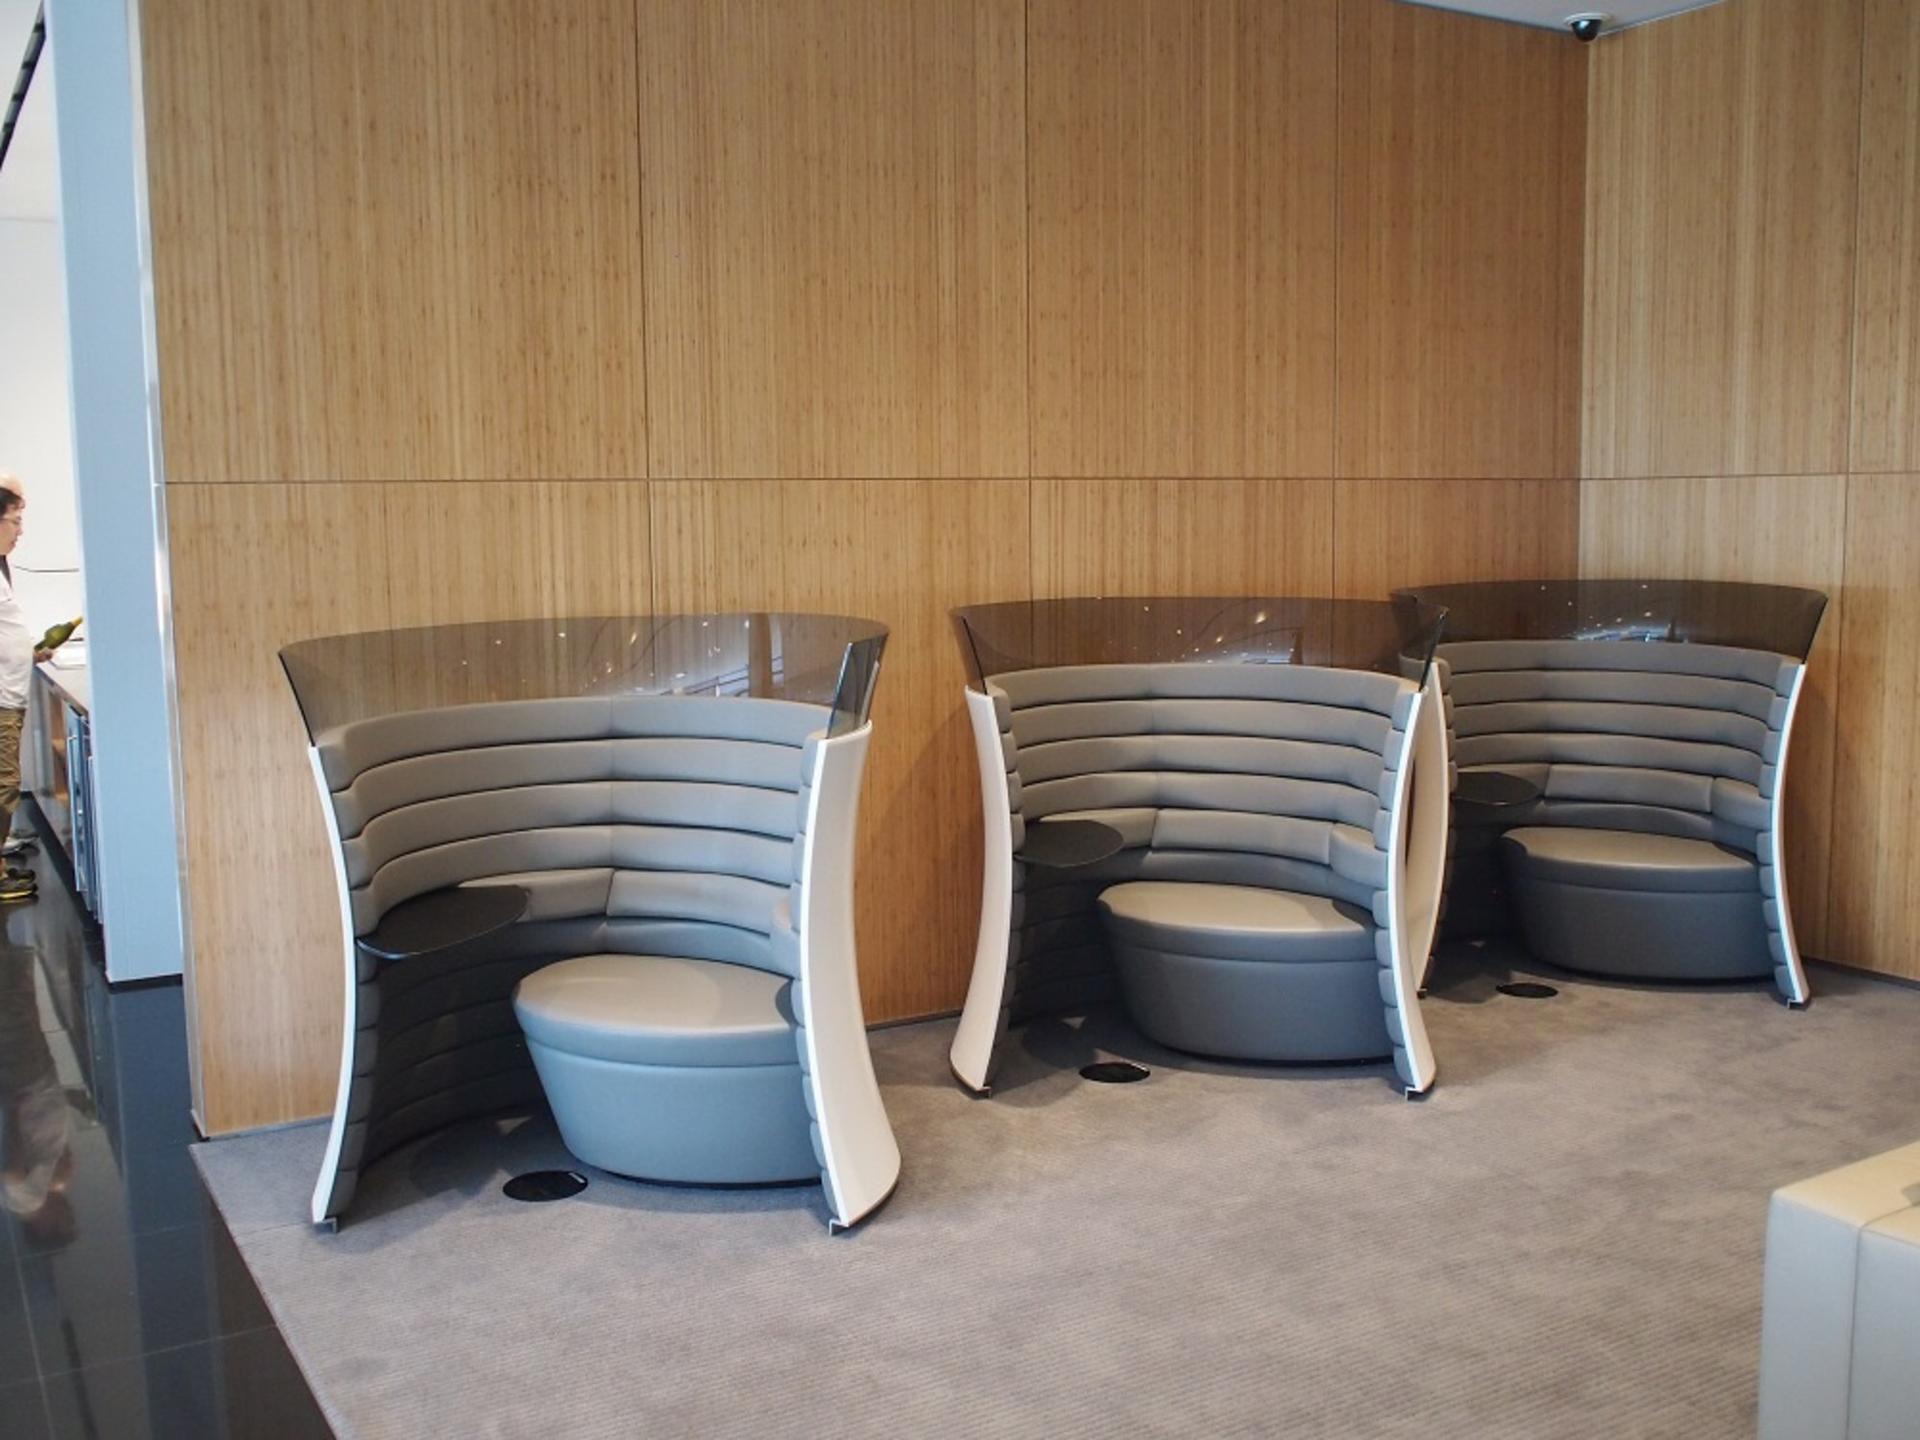 Cathay Pacific First and Business Class Lounge image 46 of 74